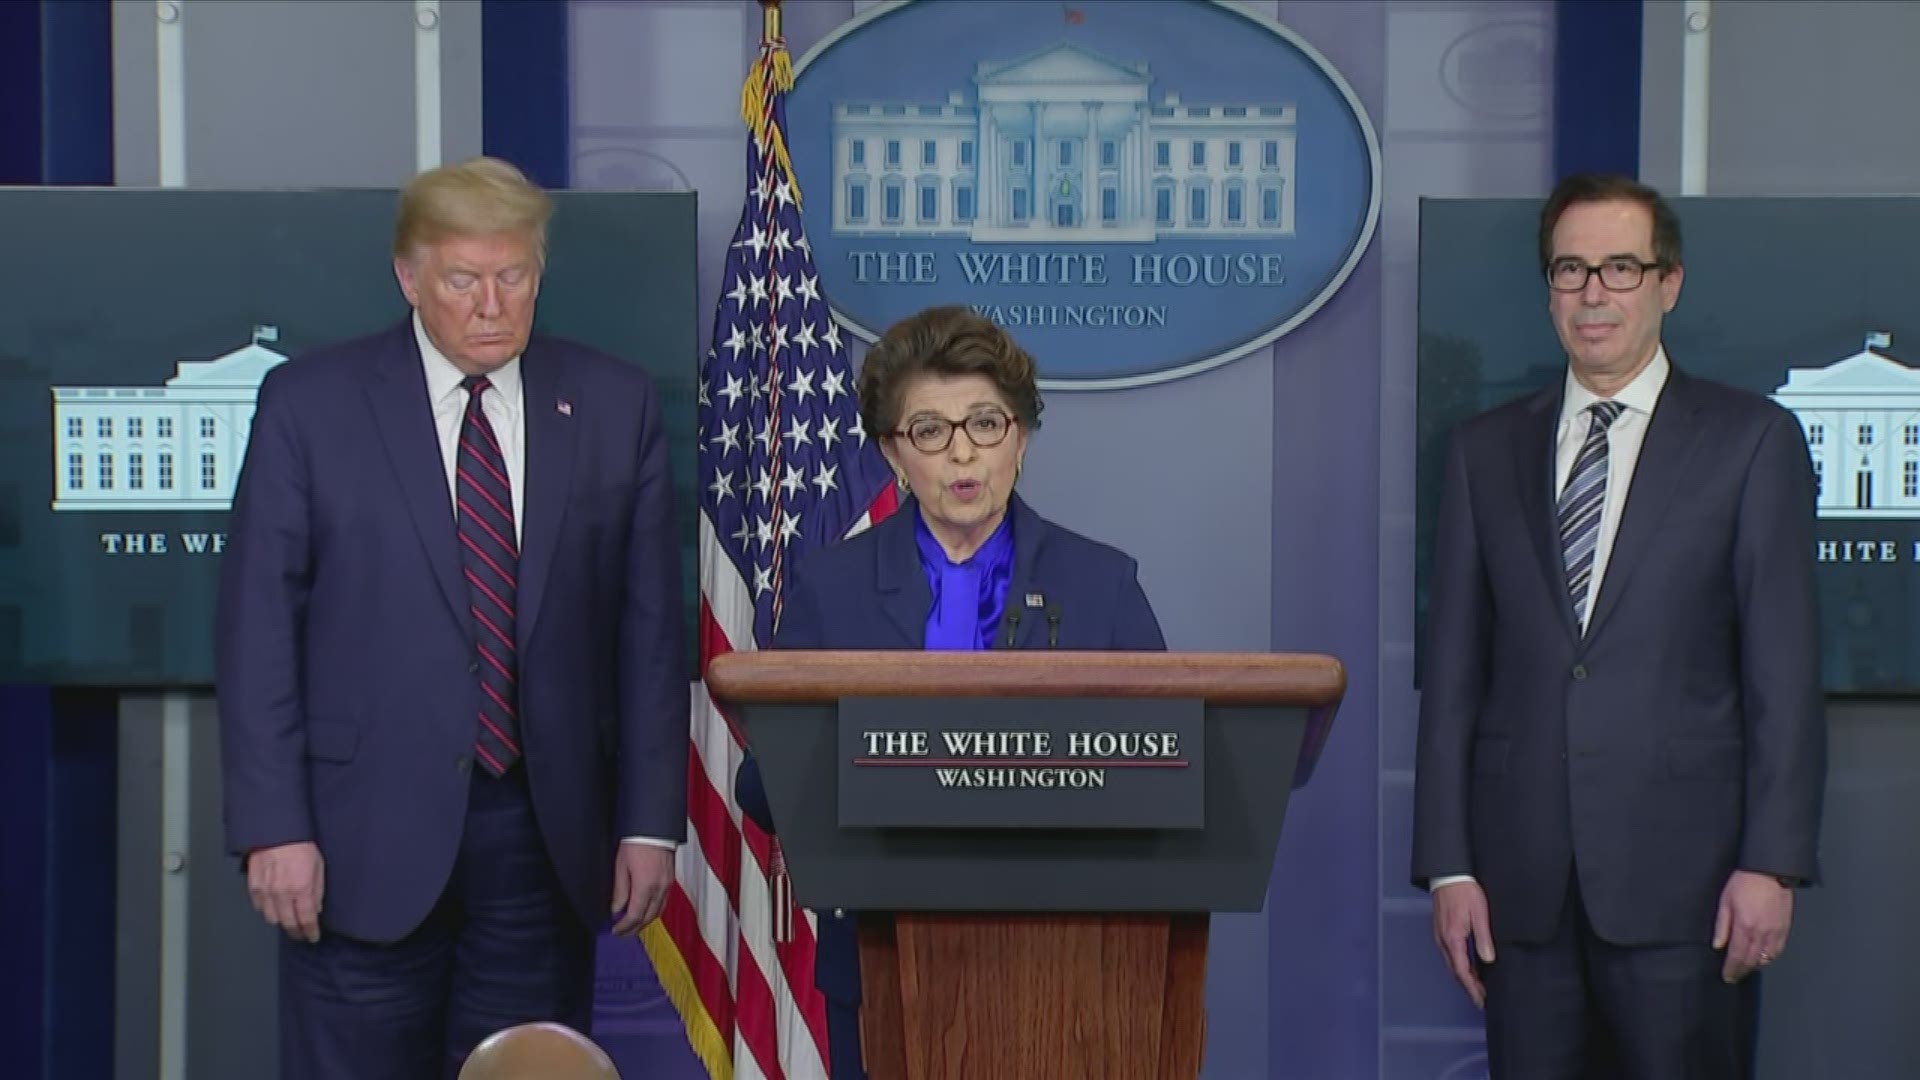 Jovita Carranza, administrator of the Small Business Administration, announced federal relief to help keep employees paid Thursday at the White House.